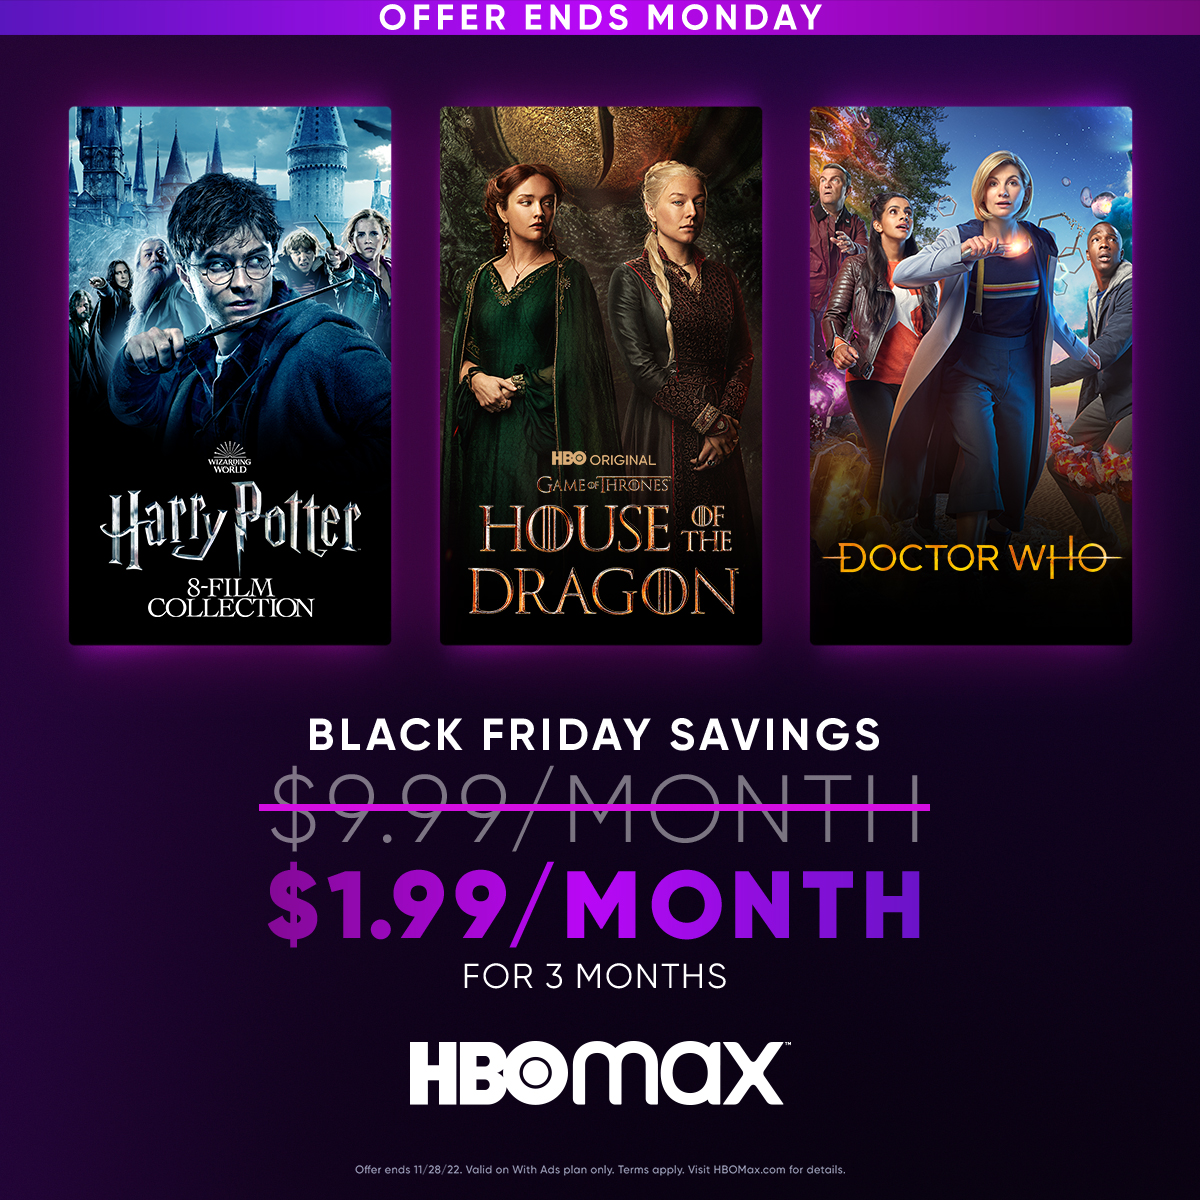 BLACK FRIDAY deals on streaming channels (HBO Max, Hulu, Paramount+